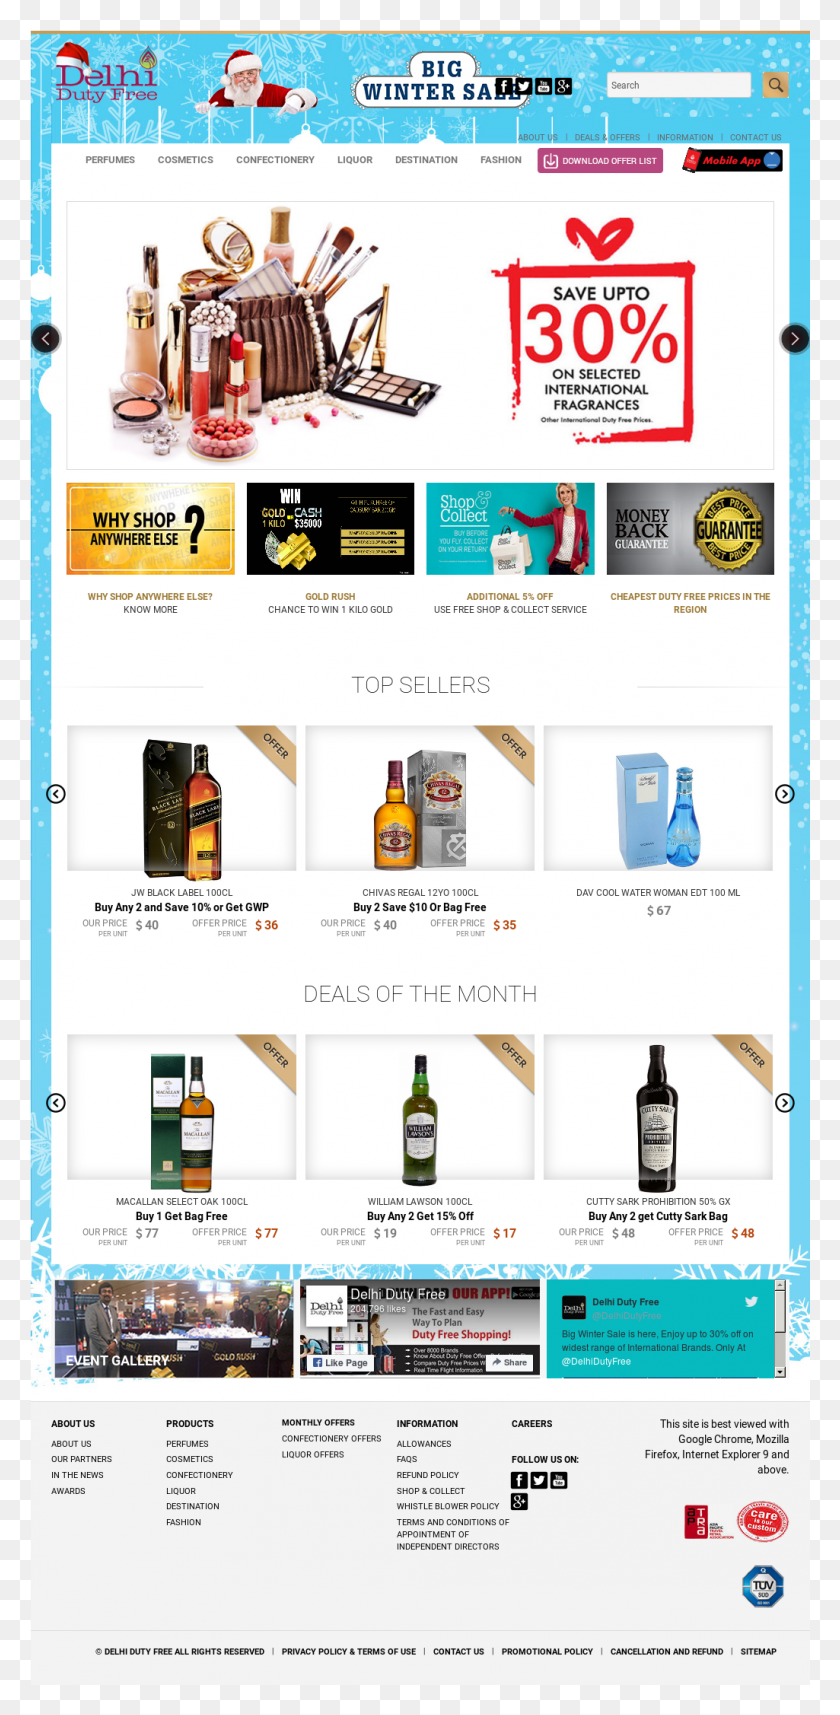 1025x2175 Delhi Duty Free Competitors Revenue And Employees Online Advertising, Flyer, Poster, Paper HD PNG Download